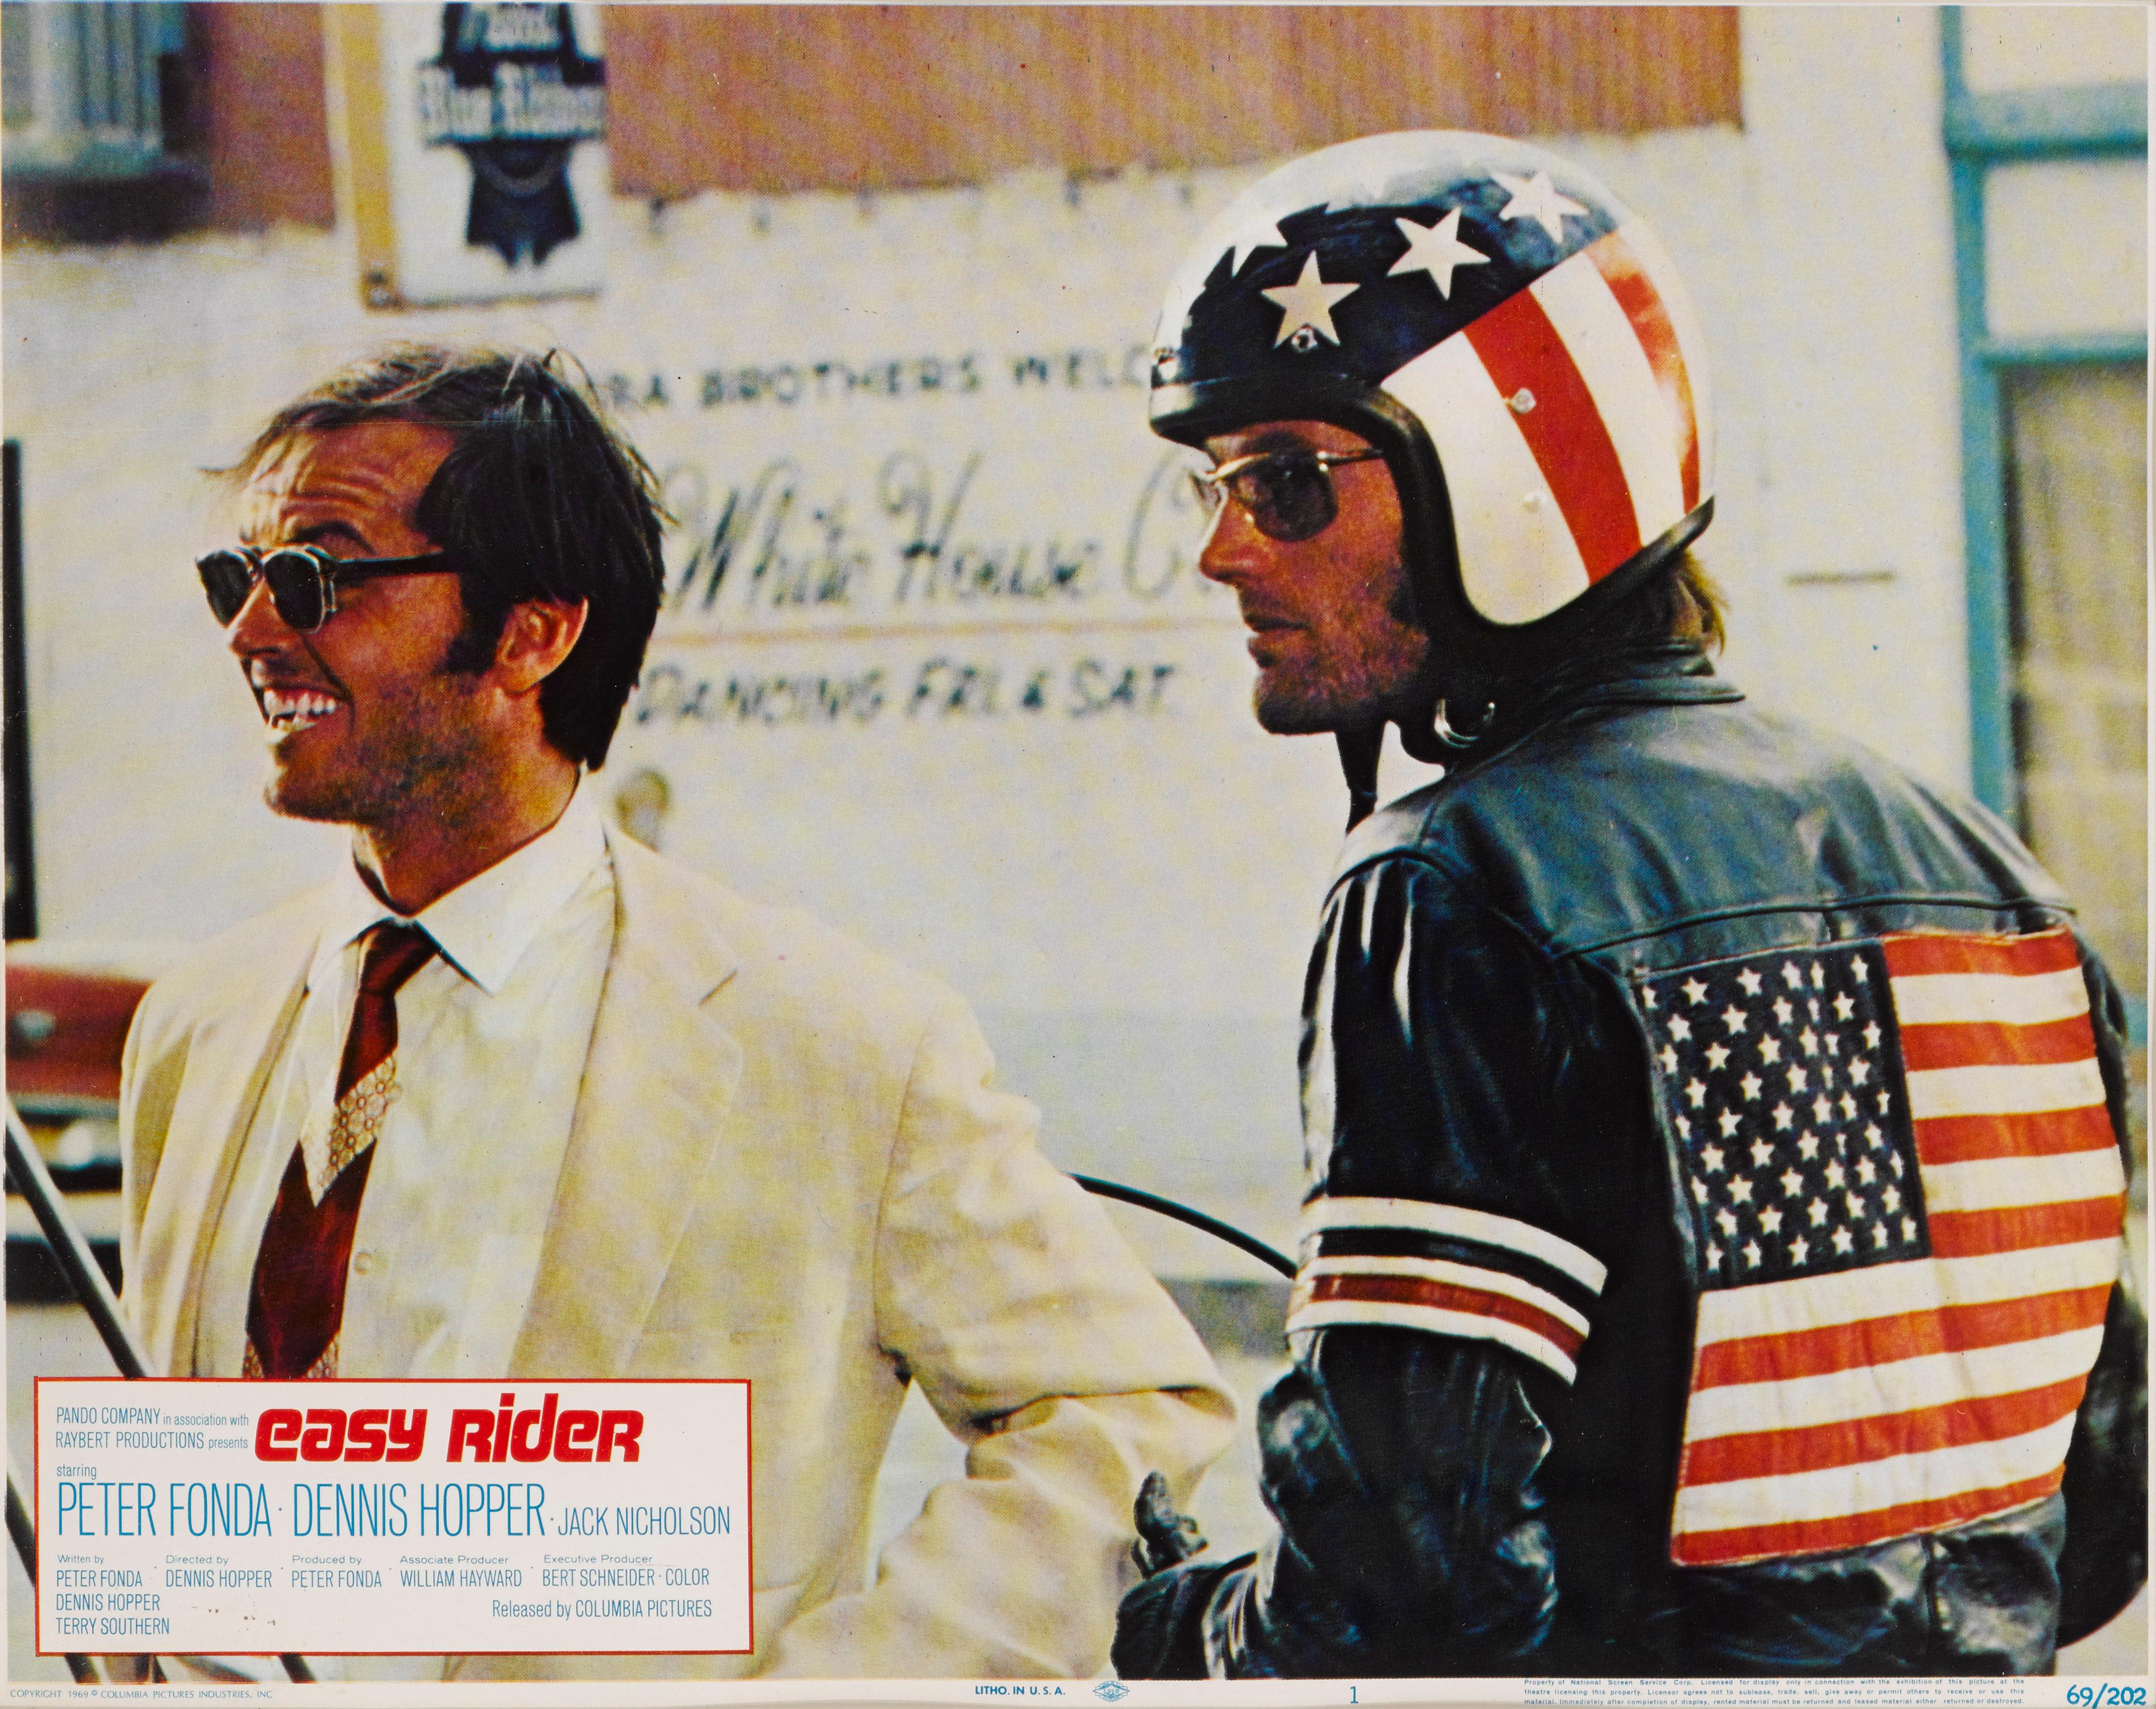 Original US Lobby card
This American road movie was written by Peter Fonda, Dennis Hopper and Terry Southern. It was produced by Fonda and directed by Hopper. This is a landmark film that captured the national imagination of America in the